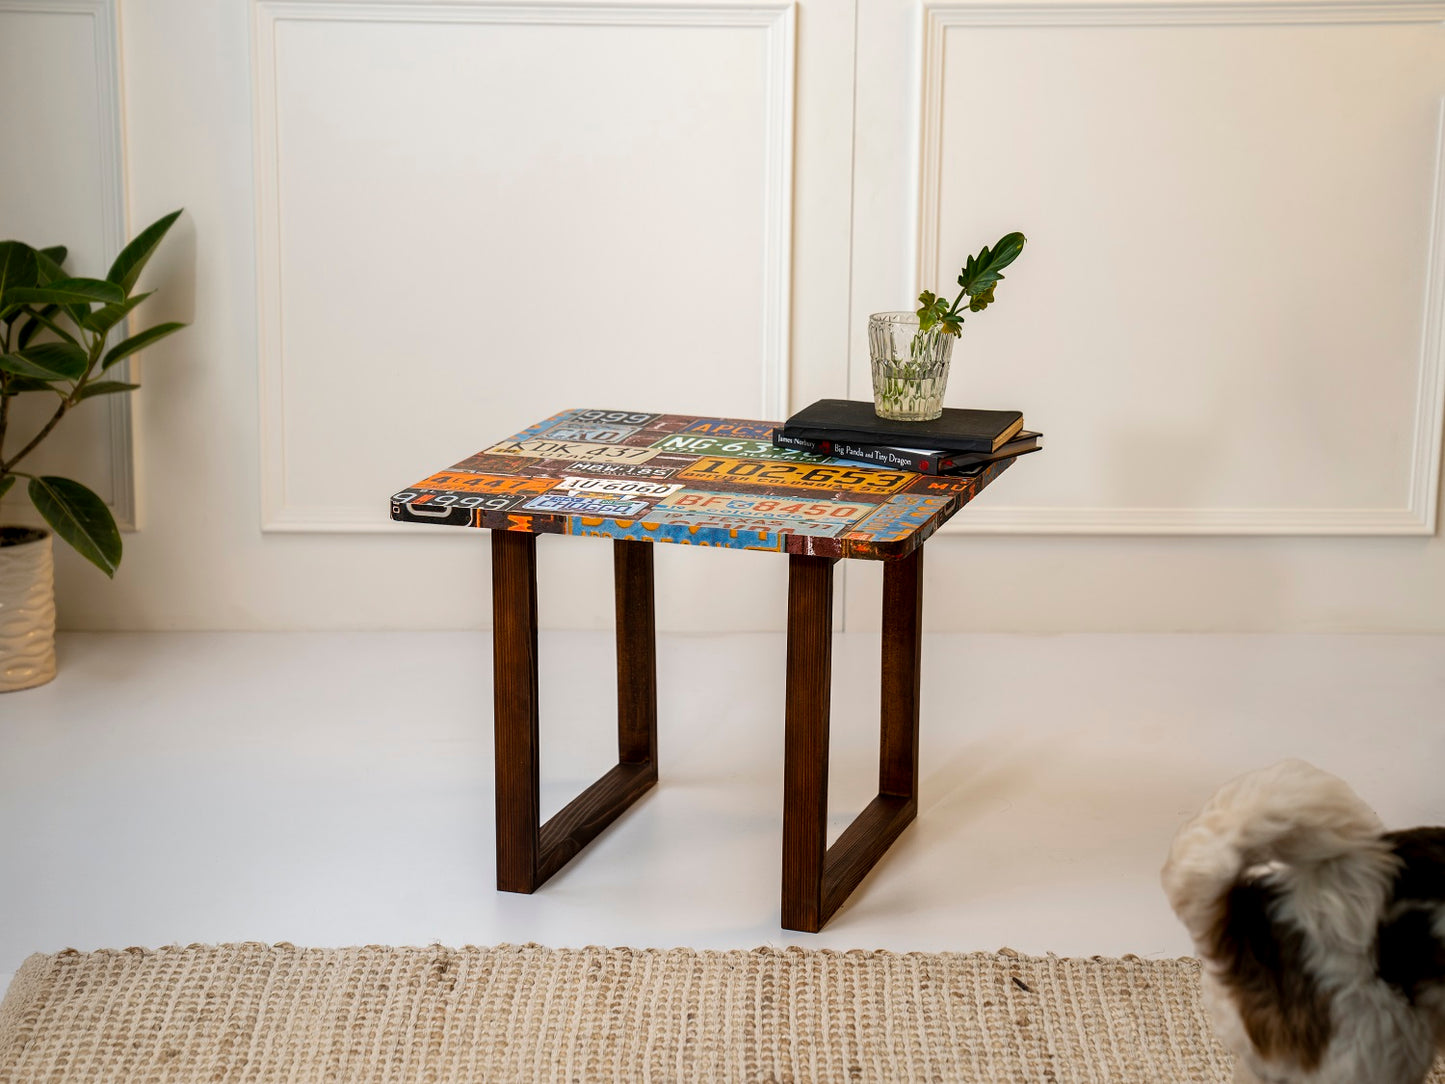 Muddy Miles Square Coffee Tables, Wooden Tables, Coffee Tables, Center Tables, Living Room Decor by A Tiny Mistake